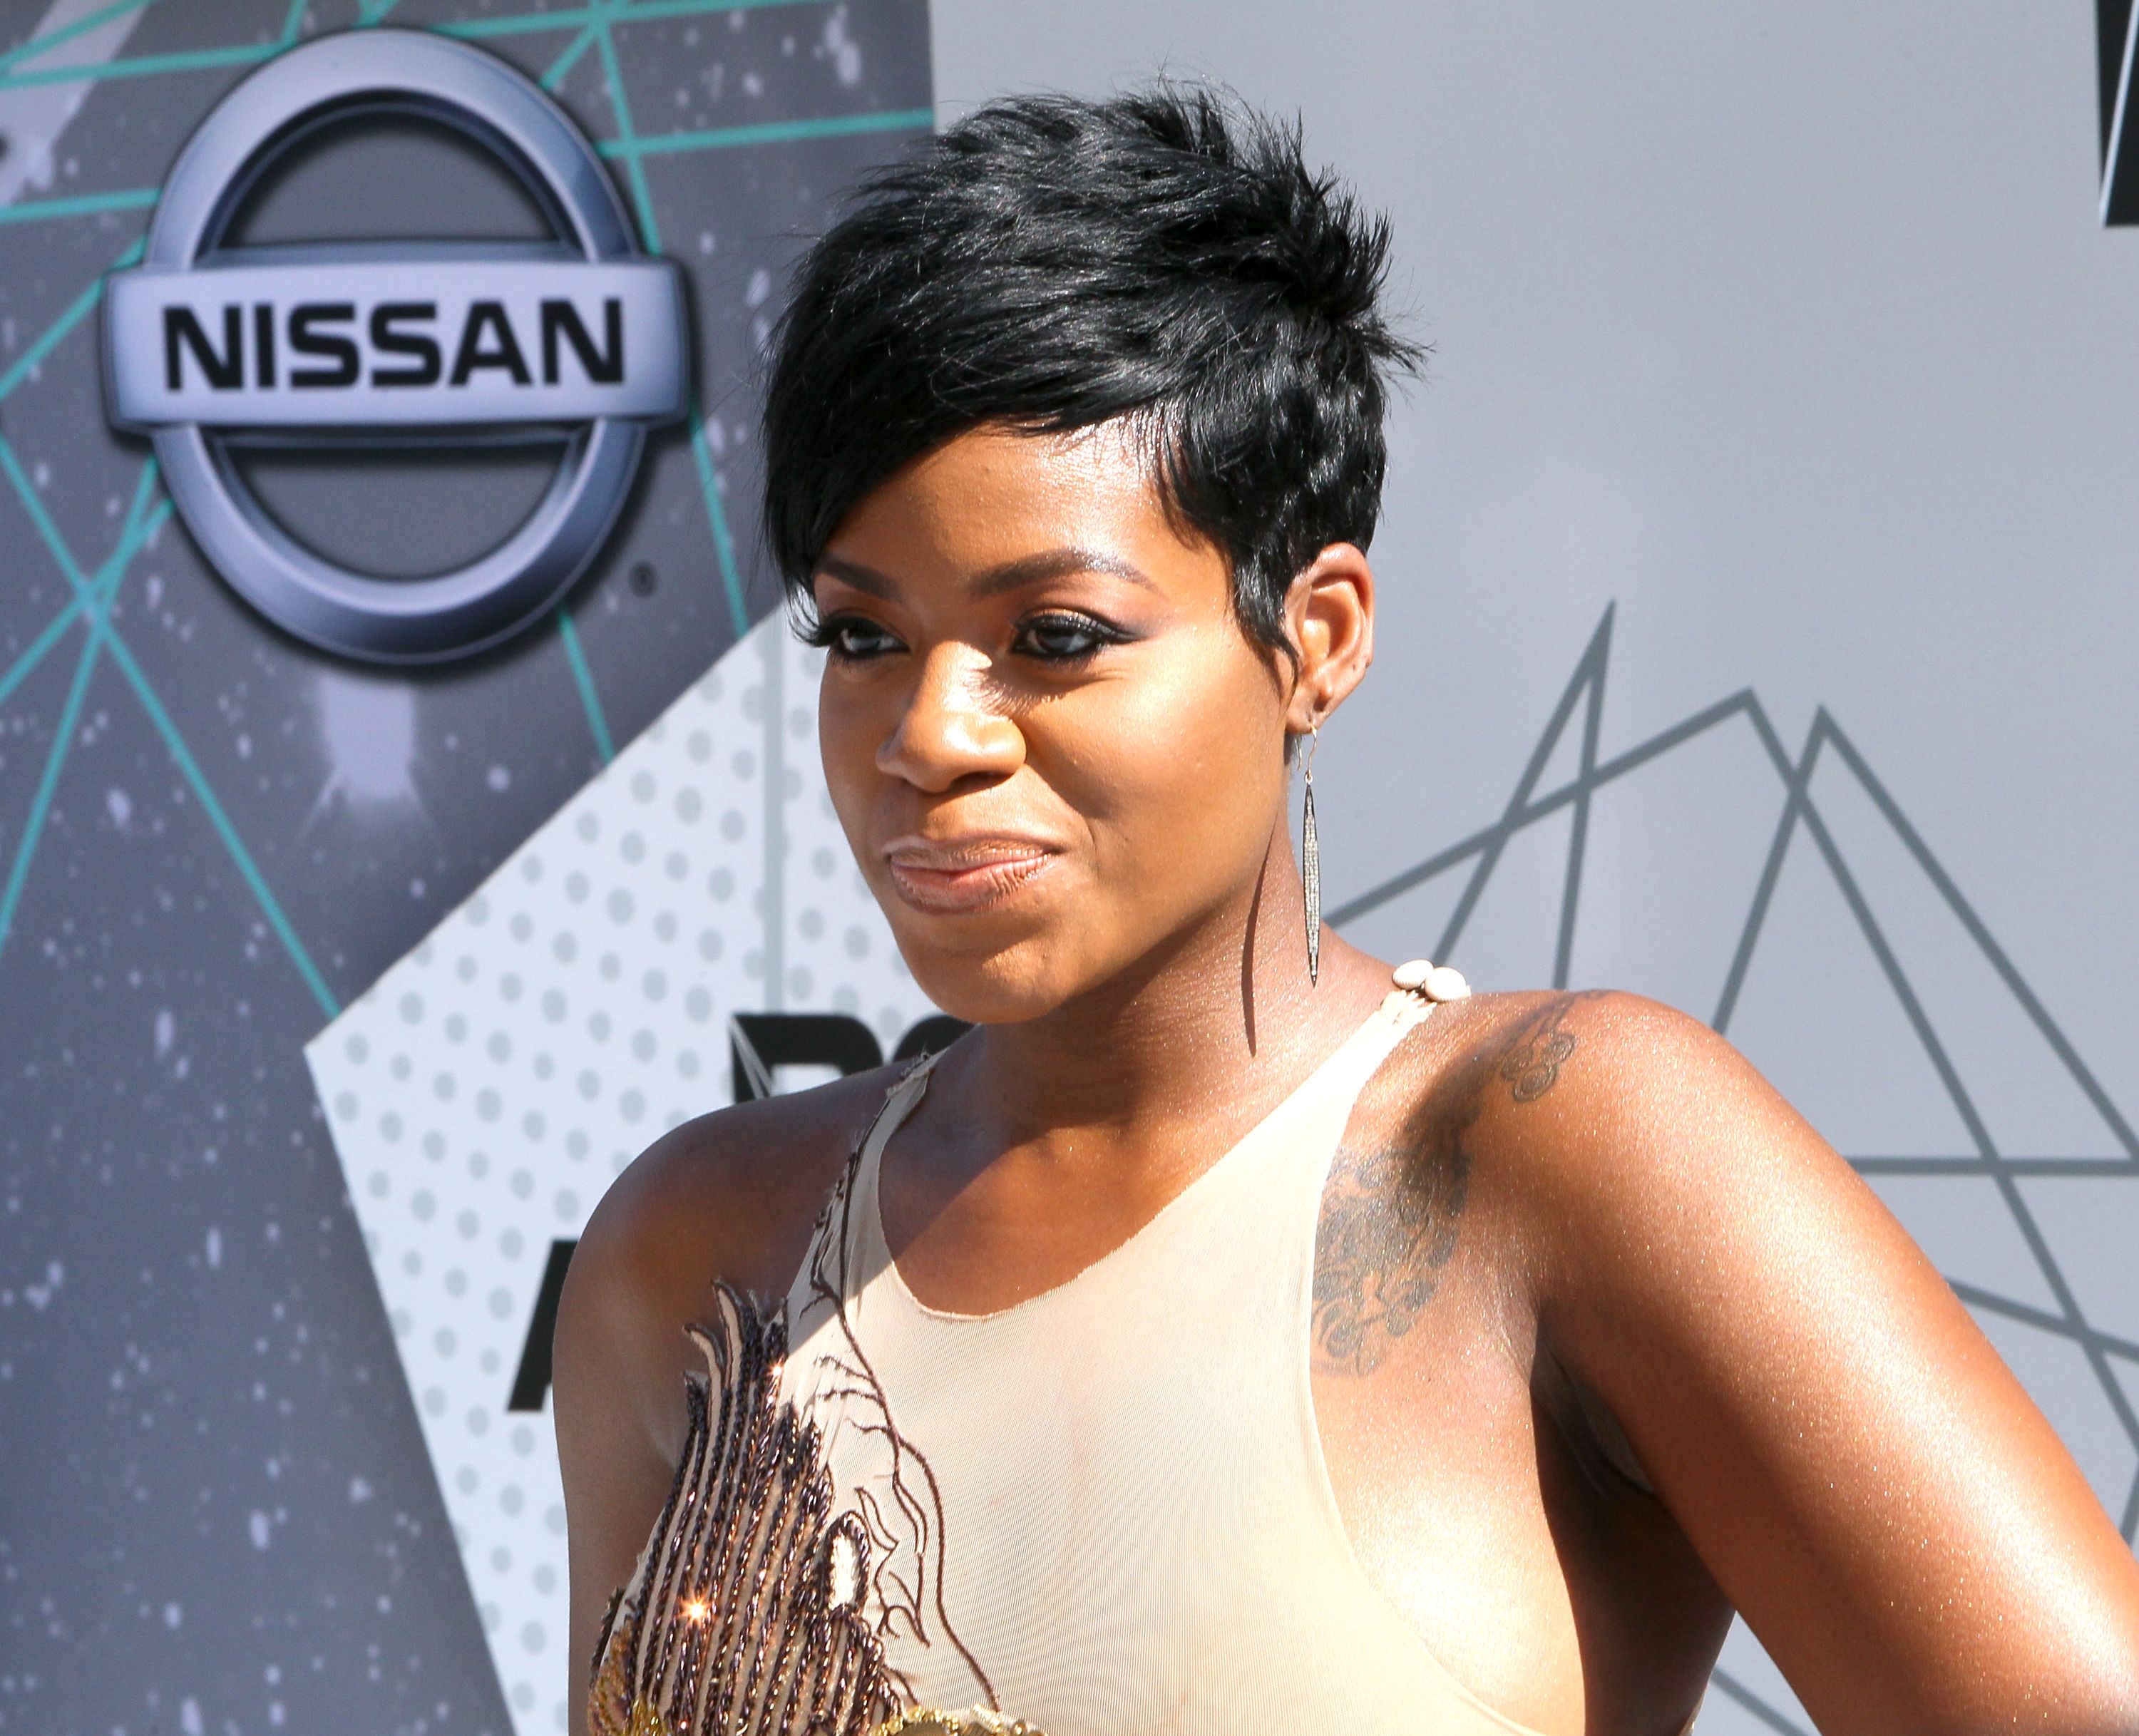 Singer Fantasia Barrino attends the 2016 BET Awards at the Microsoft Theater on June 26, 2016 | Photo: Getty Images